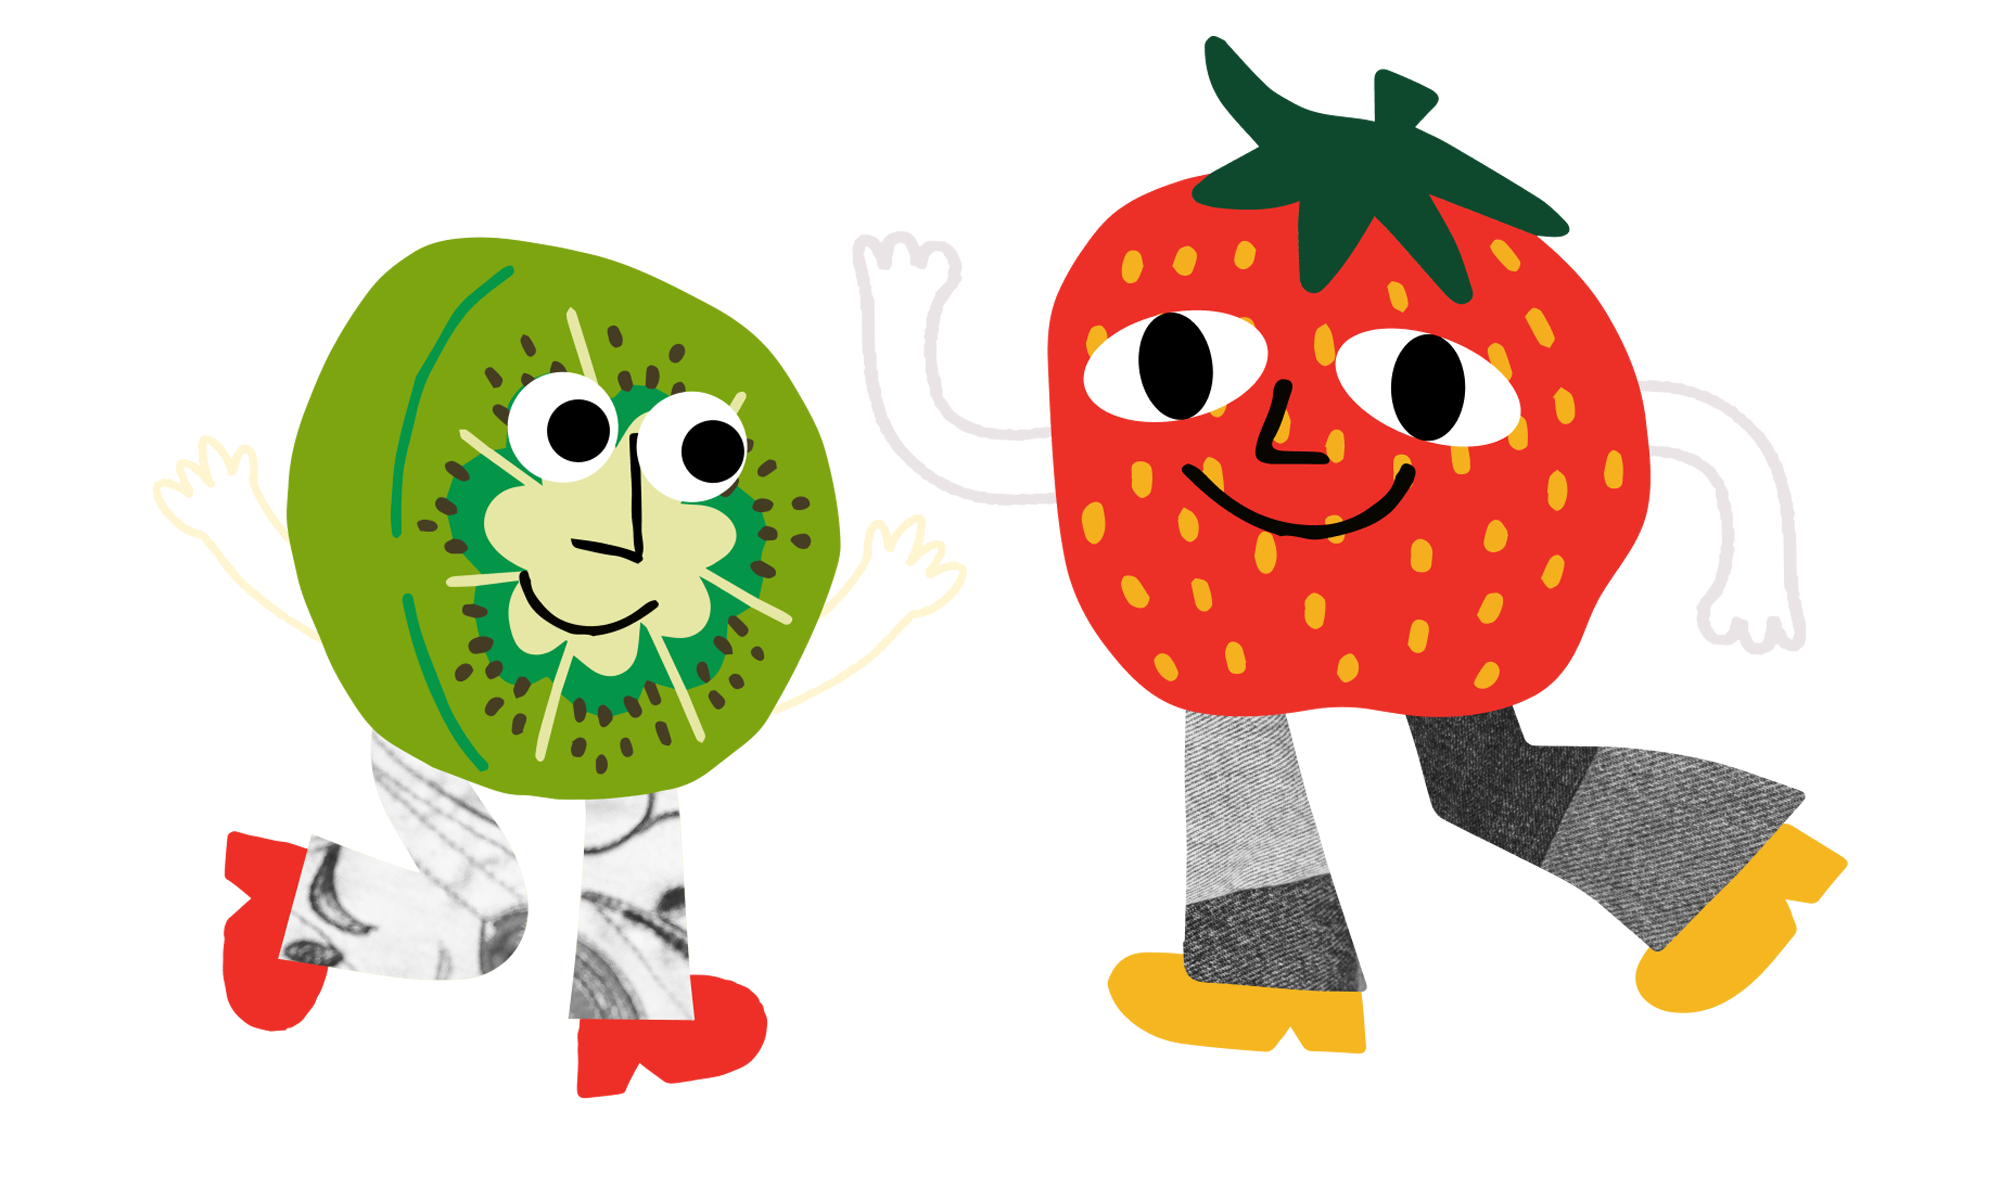 Cute kiwi and strawberry characters. The kiwi and strawberry look like they are dancing. The fruit characters are smiling at each other, have their arms in the air, and are wearing pants and shoes.